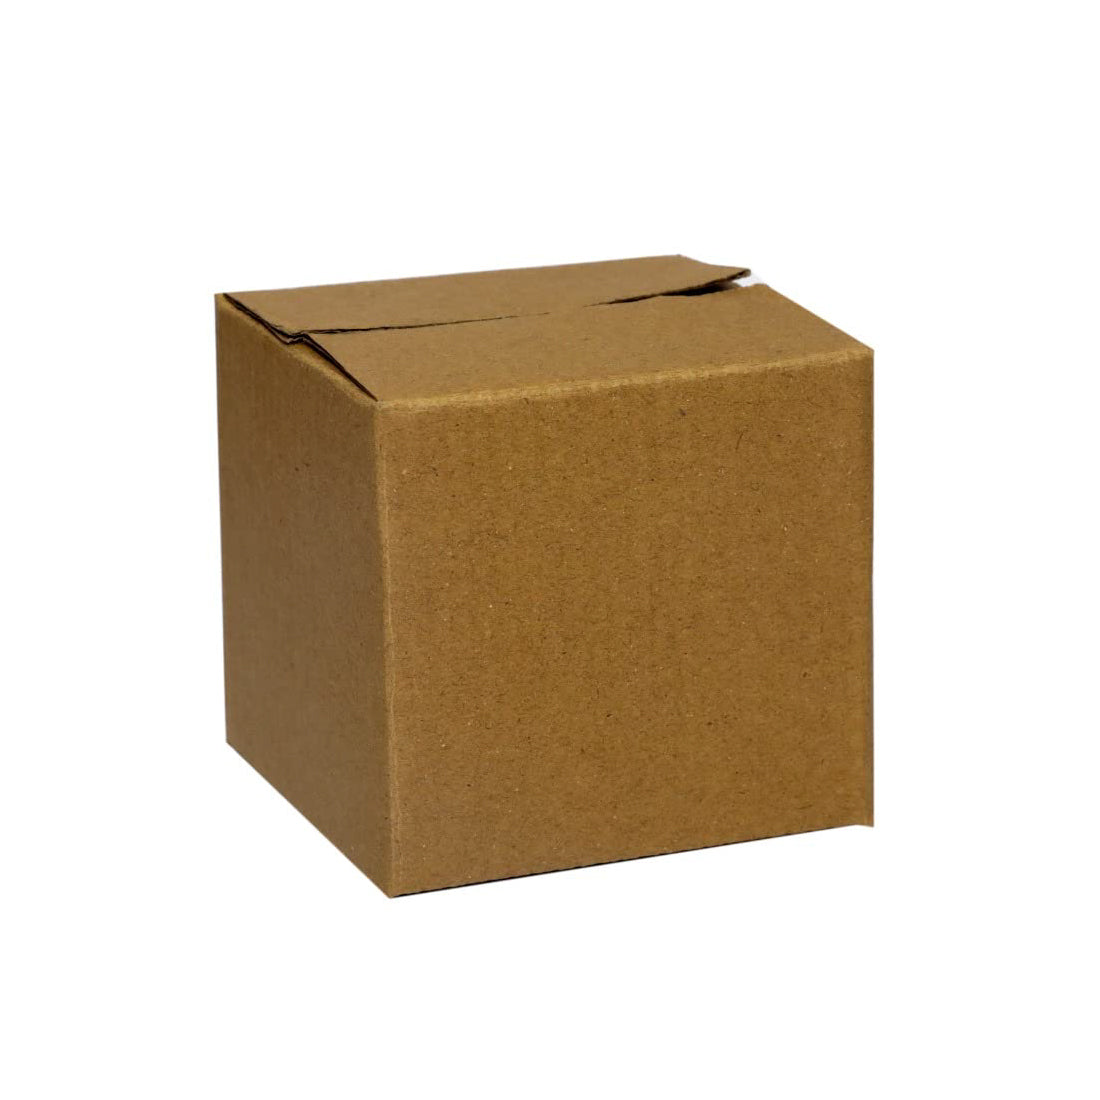 Brown Corrugated Cardboard Box for Packing (3.5 X 3.5 X 3.5 Inches) - Pack of 50 Boxes